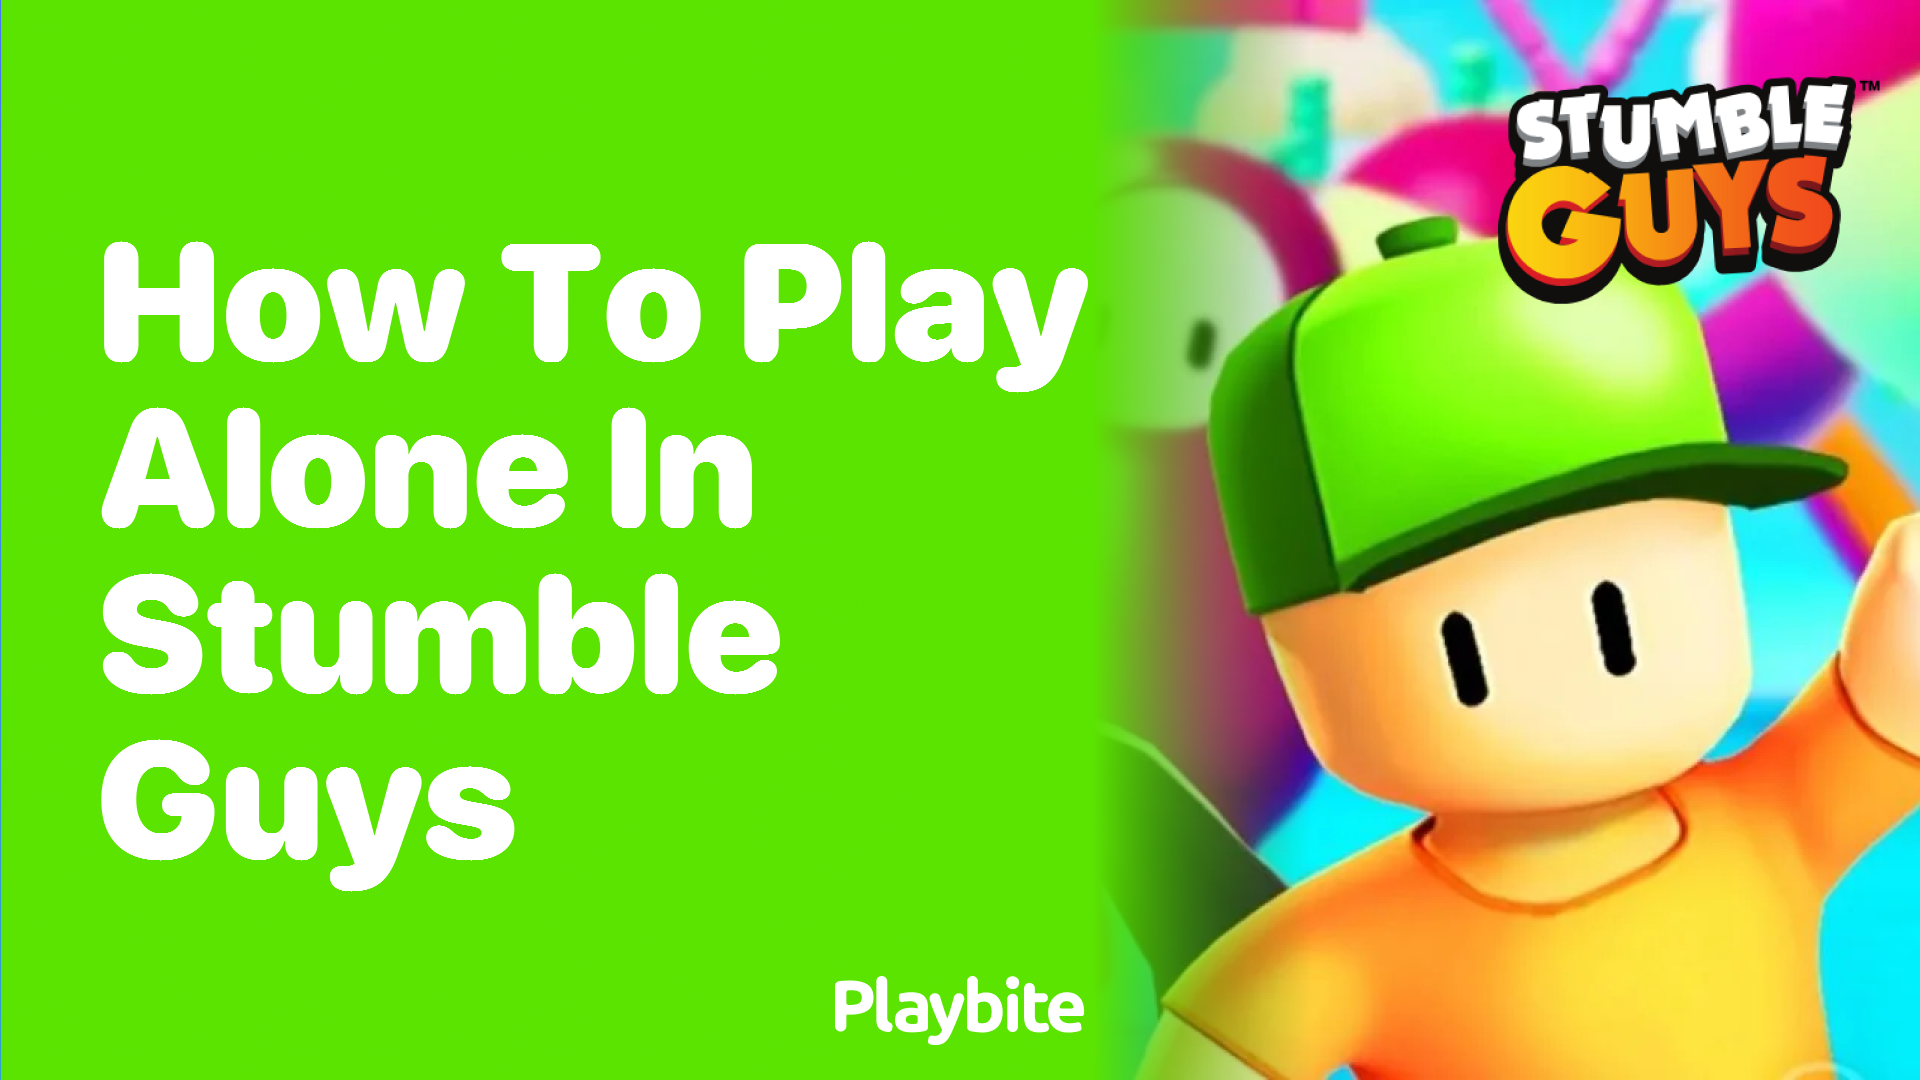 How to Play Alone in Stumble Guys: A Quick Guide